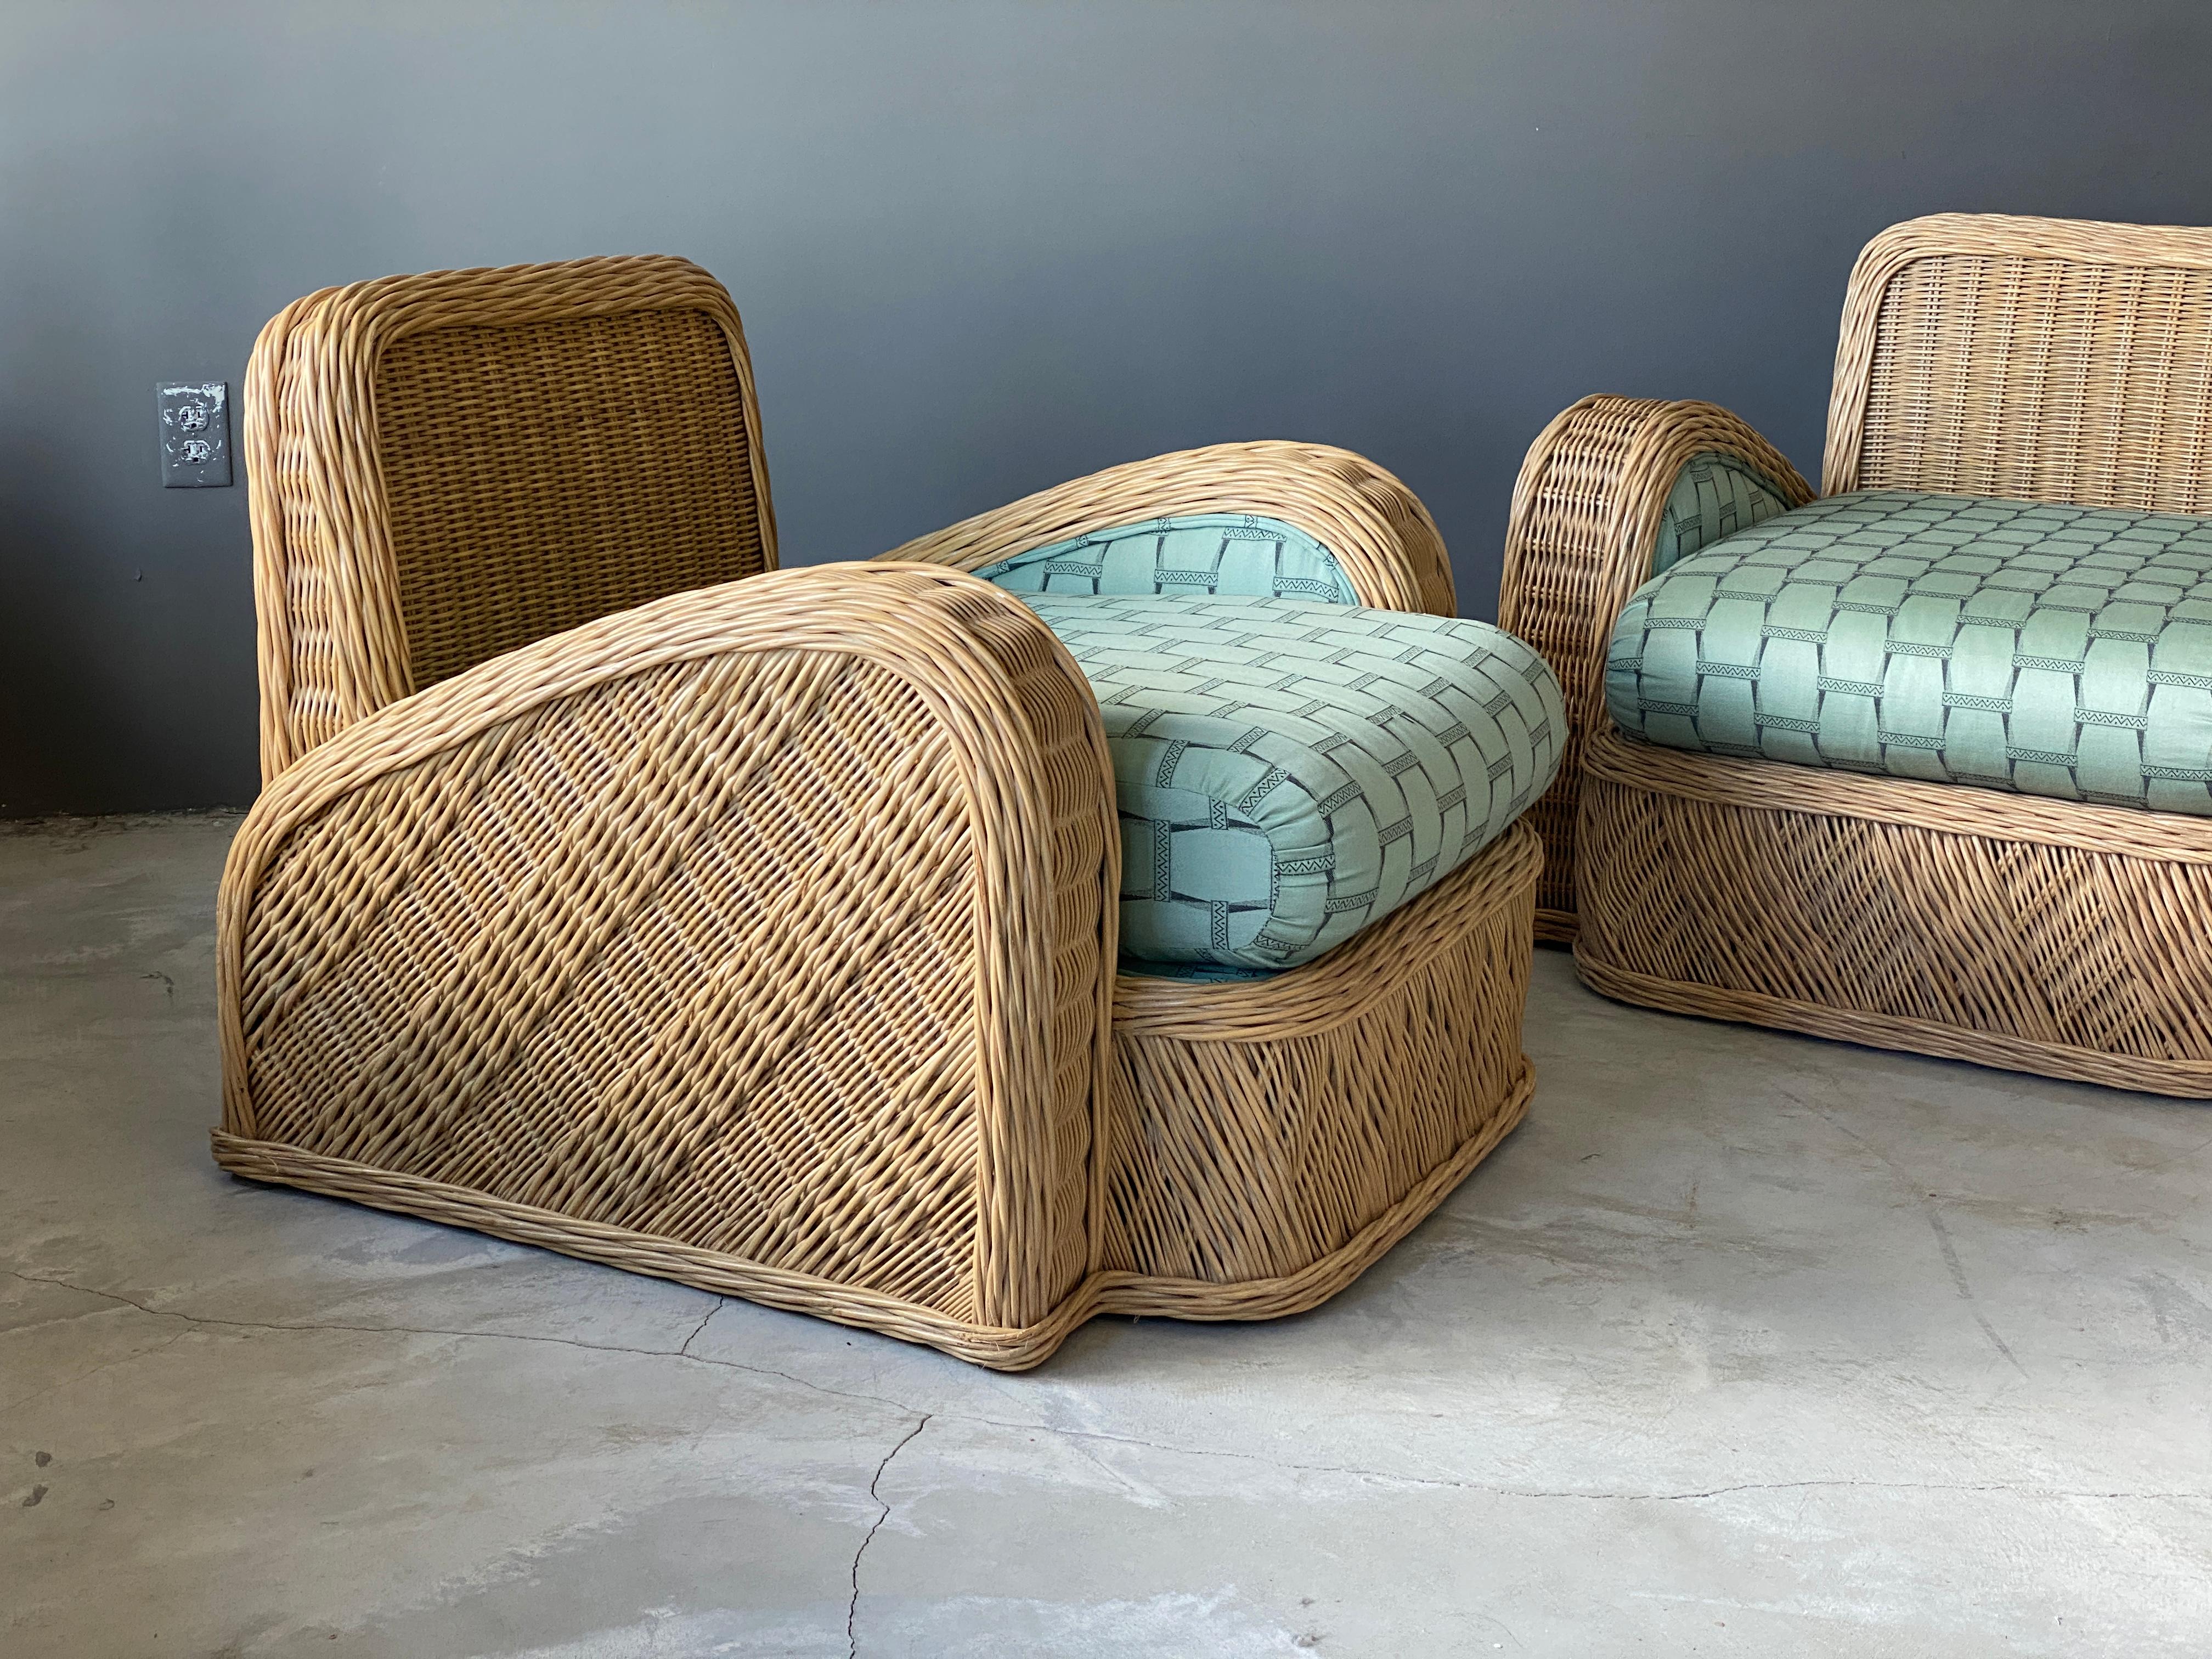 A pair of modernist lounge chairs designed by Jay Spectre. Produced in the 1980s, USA. Labeled. In intricately woven rattan.

Other designers of the period include Paul Frankl, T.H. Robsjohn-Gibbings, Paul Evans, Edward Wormley, and Tommi